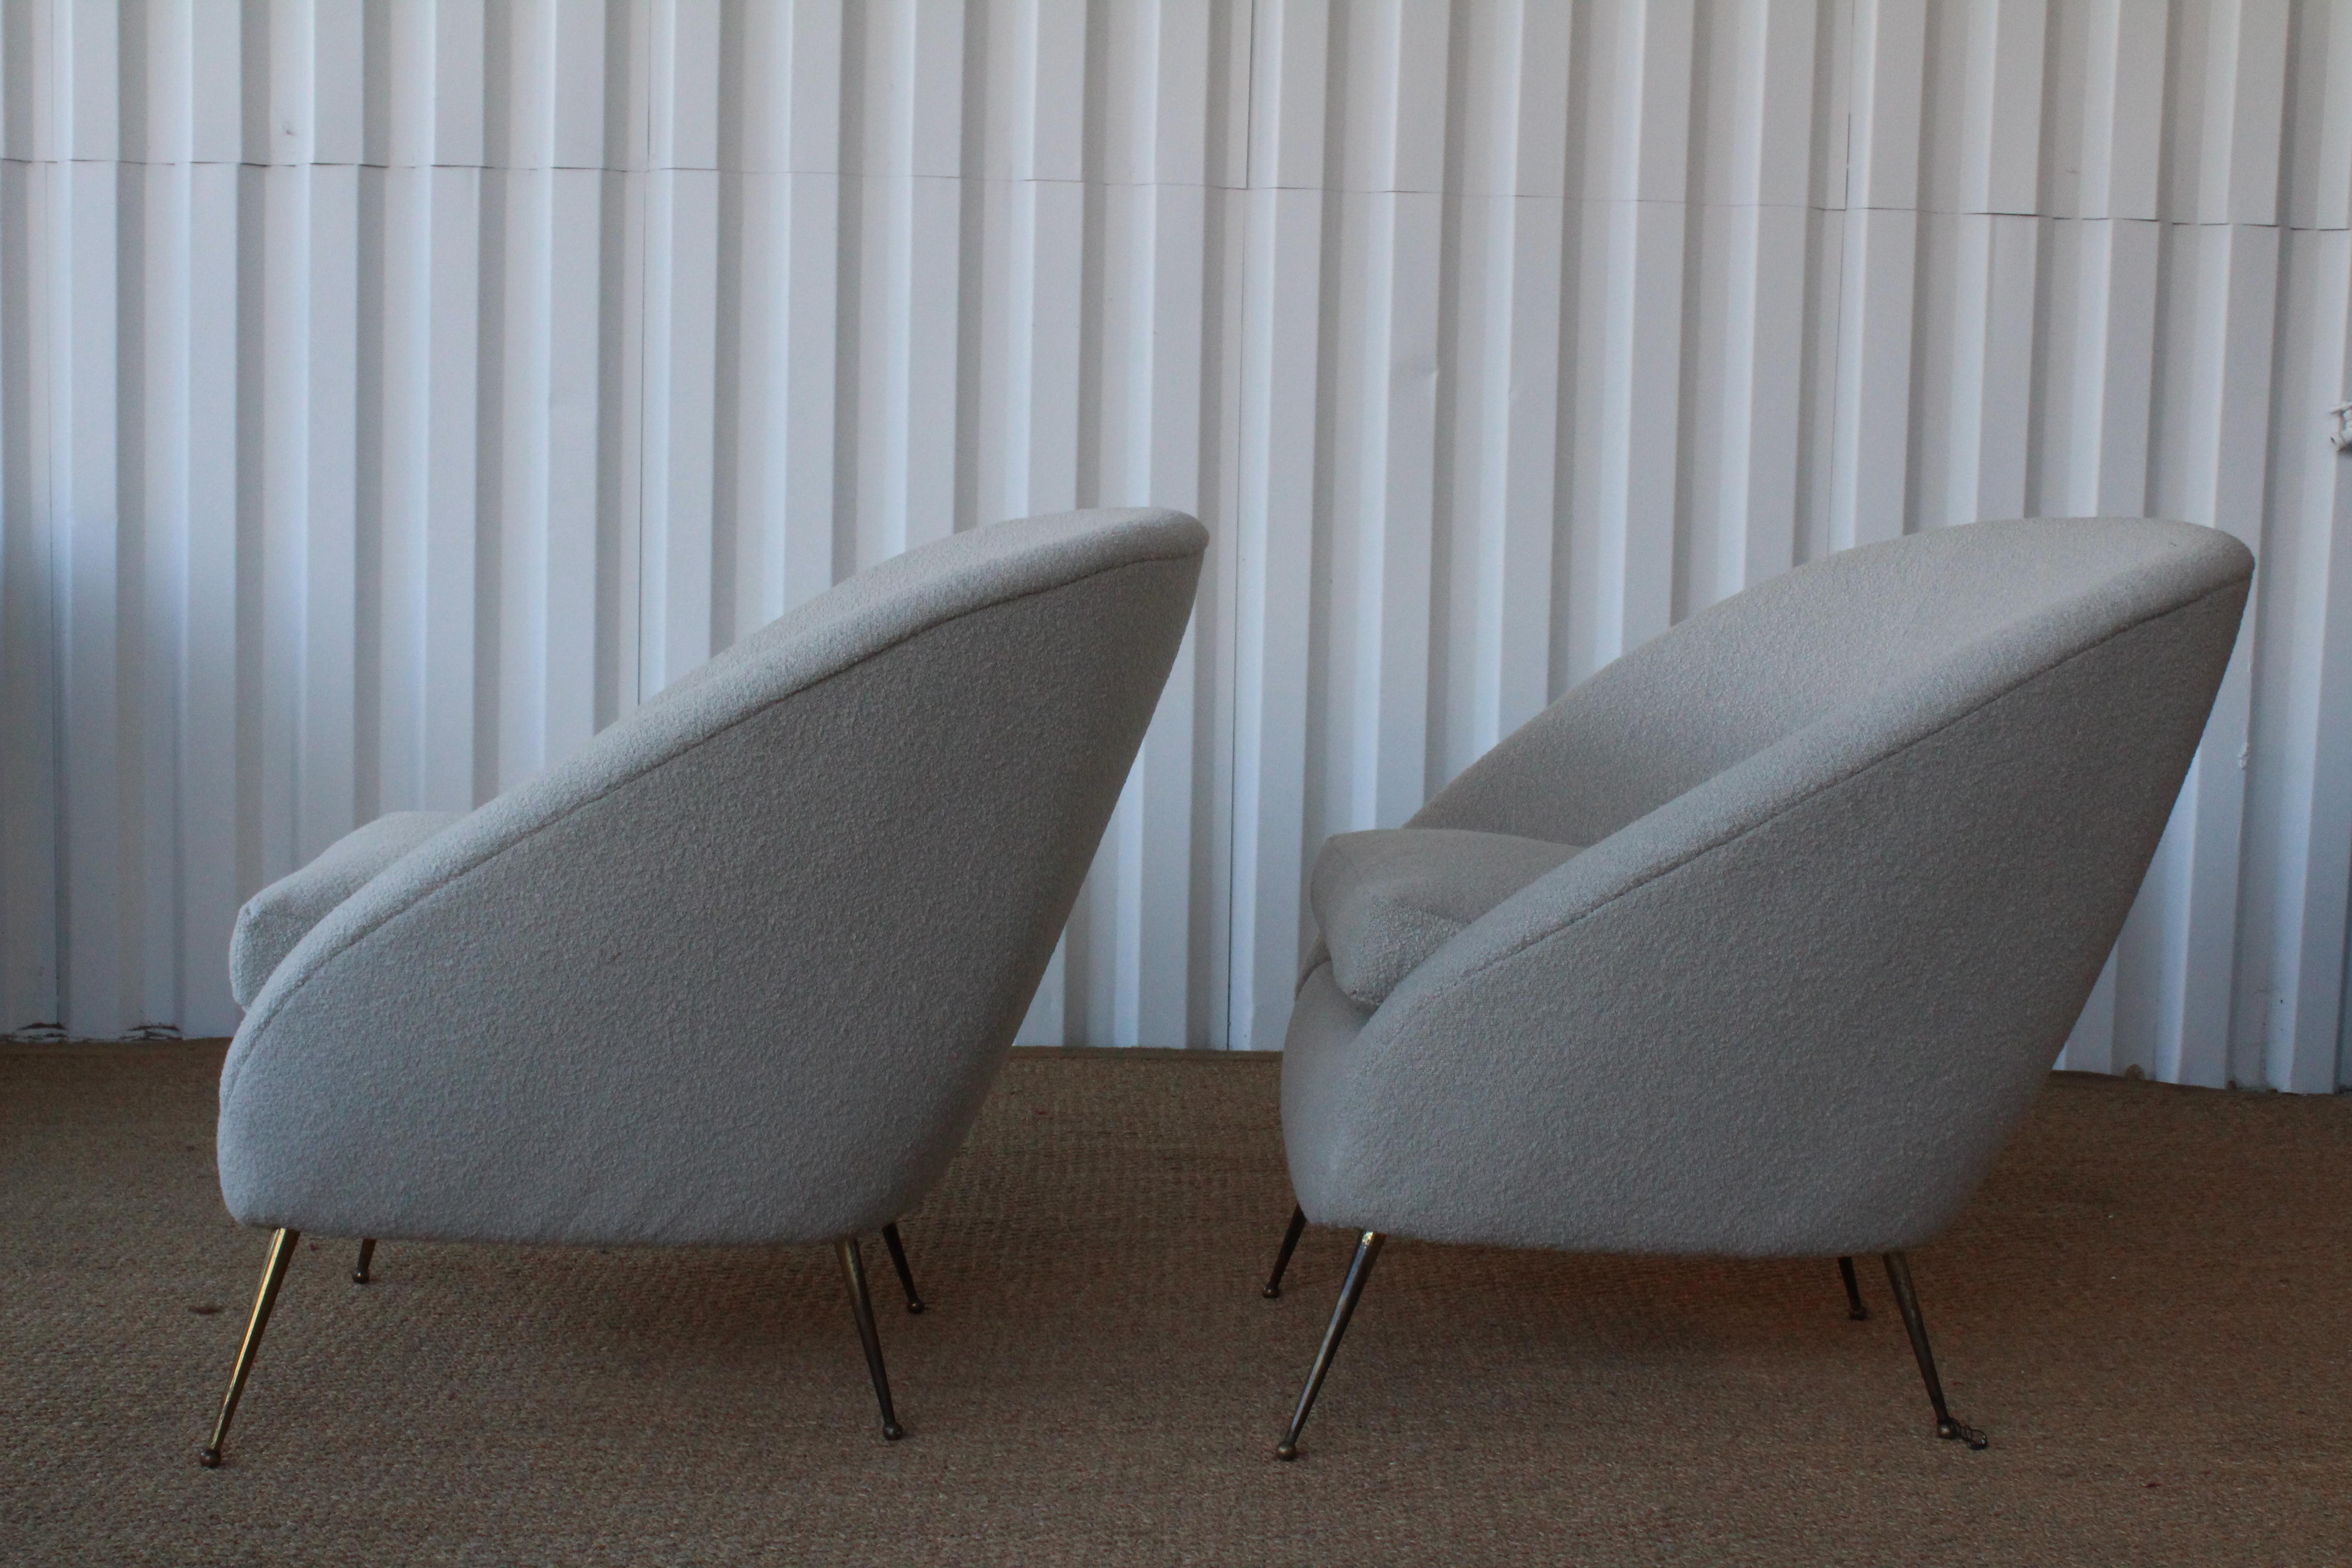 Pair of 1950s Italian lounge chairs with brass legs, fully restored and reupholstered in a wool blend bouclé fabric. Wonderful patina to the brass legs.